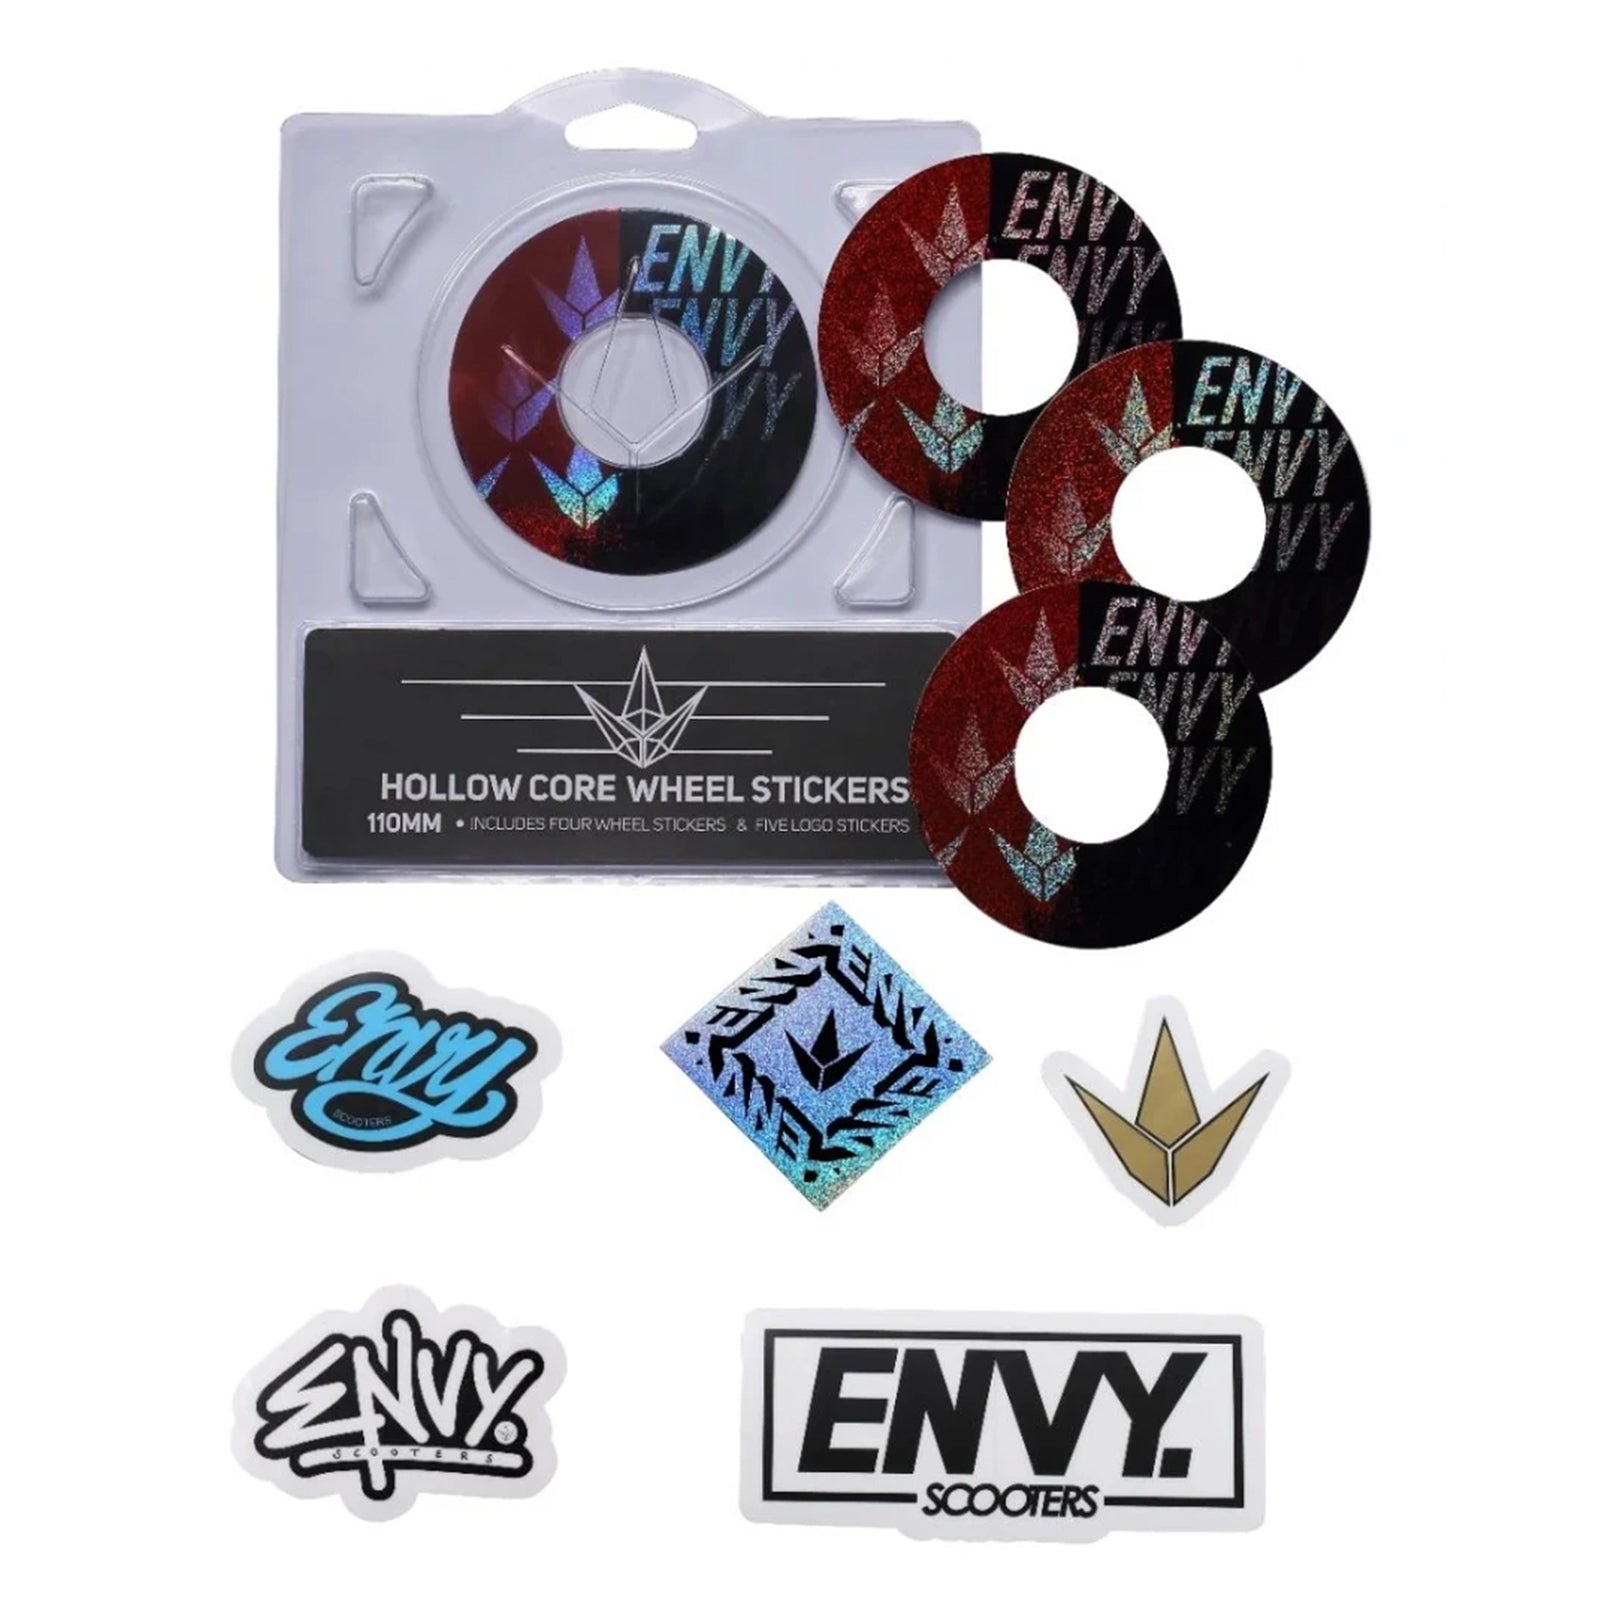 Envy Hollow Core Wheel Stickers, 110mm Wheel Stickers (Various Designs)